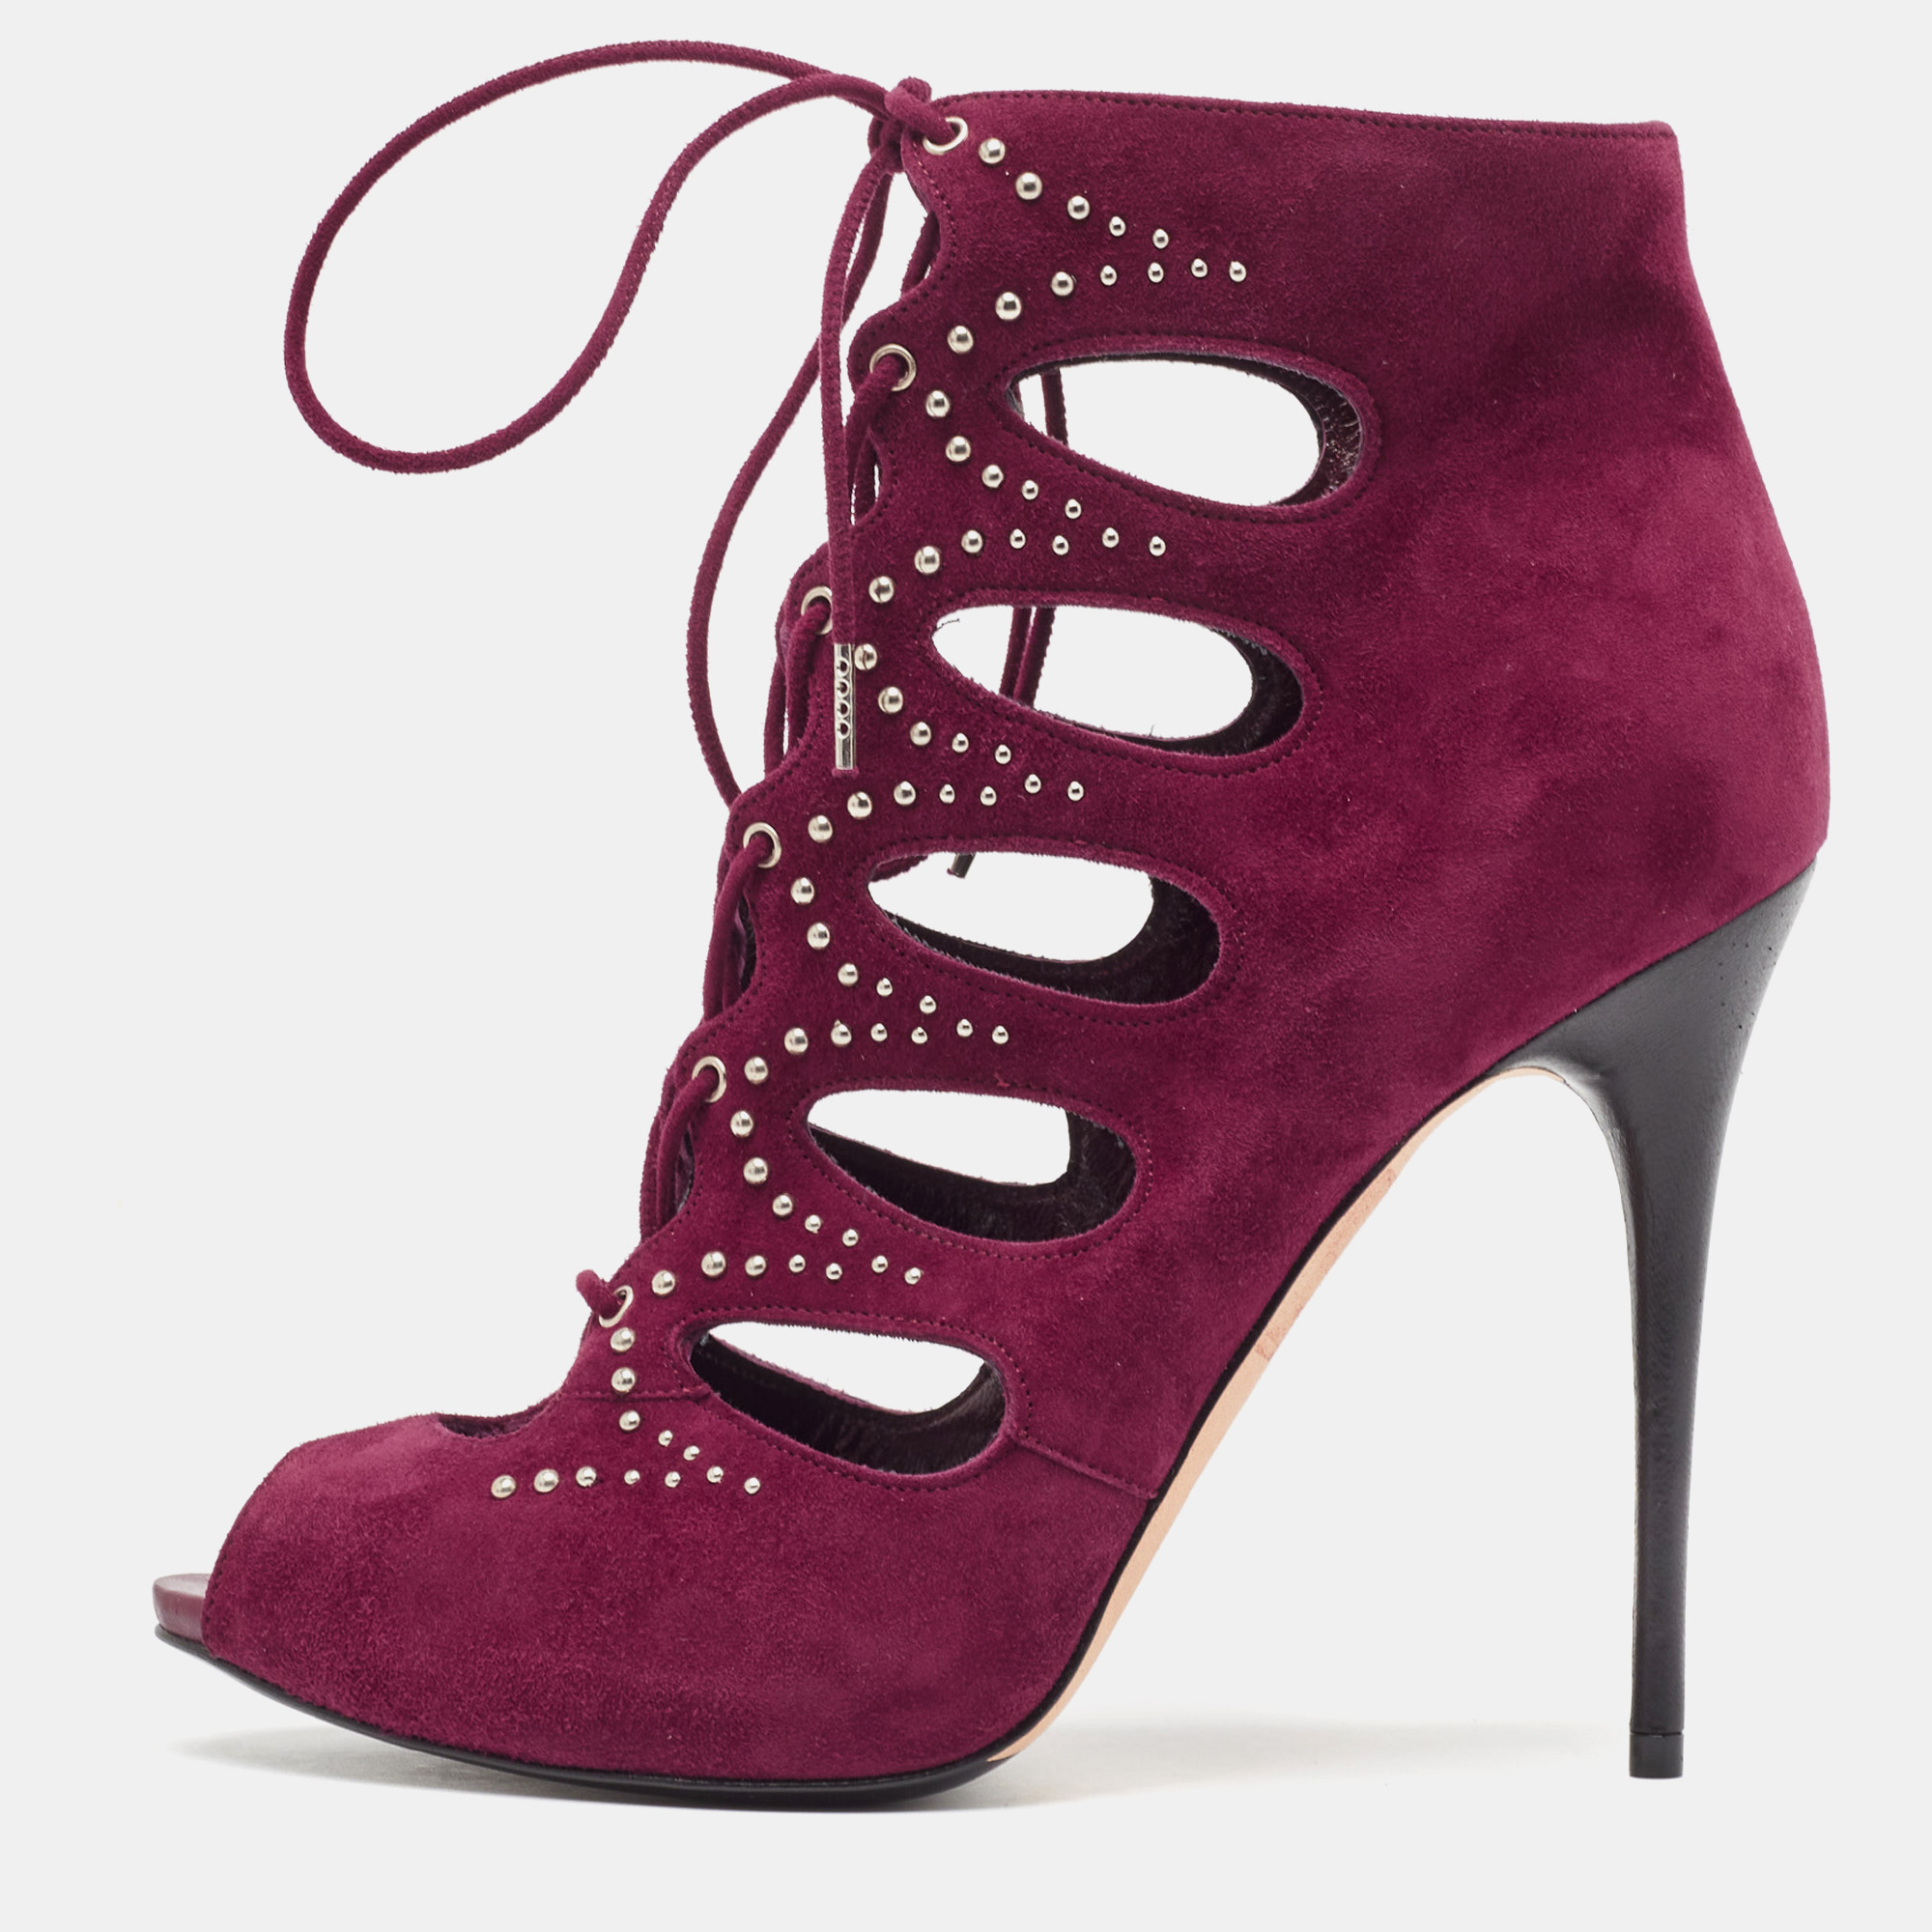 Pre-owned Alexander Mcqueen Burgundy Cut Out Suede Studded Ankle Booties Size 37.5